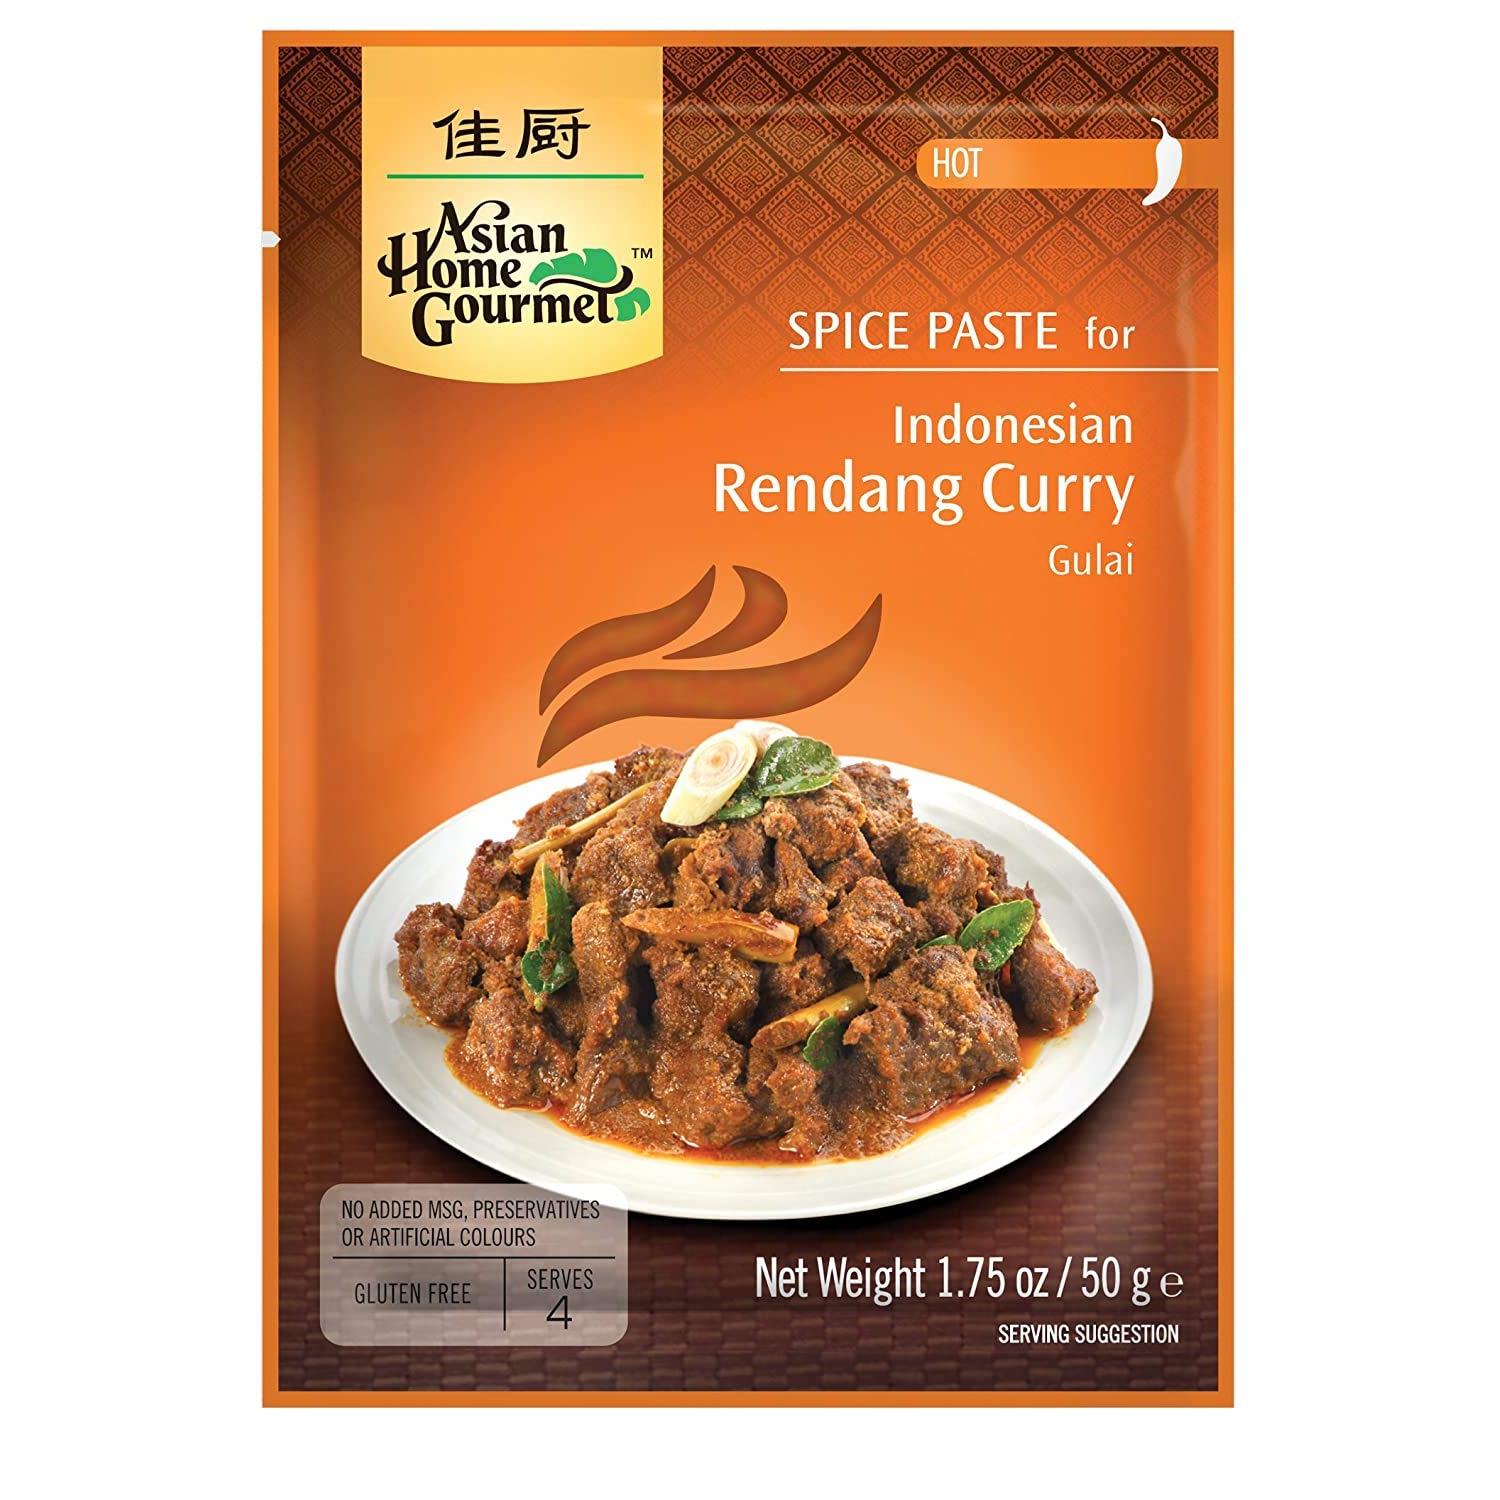 Asian Home Gourmet Spice Paste for: Indonesian Rendang Curry (Gulai) (1 x 1.75 OZ)